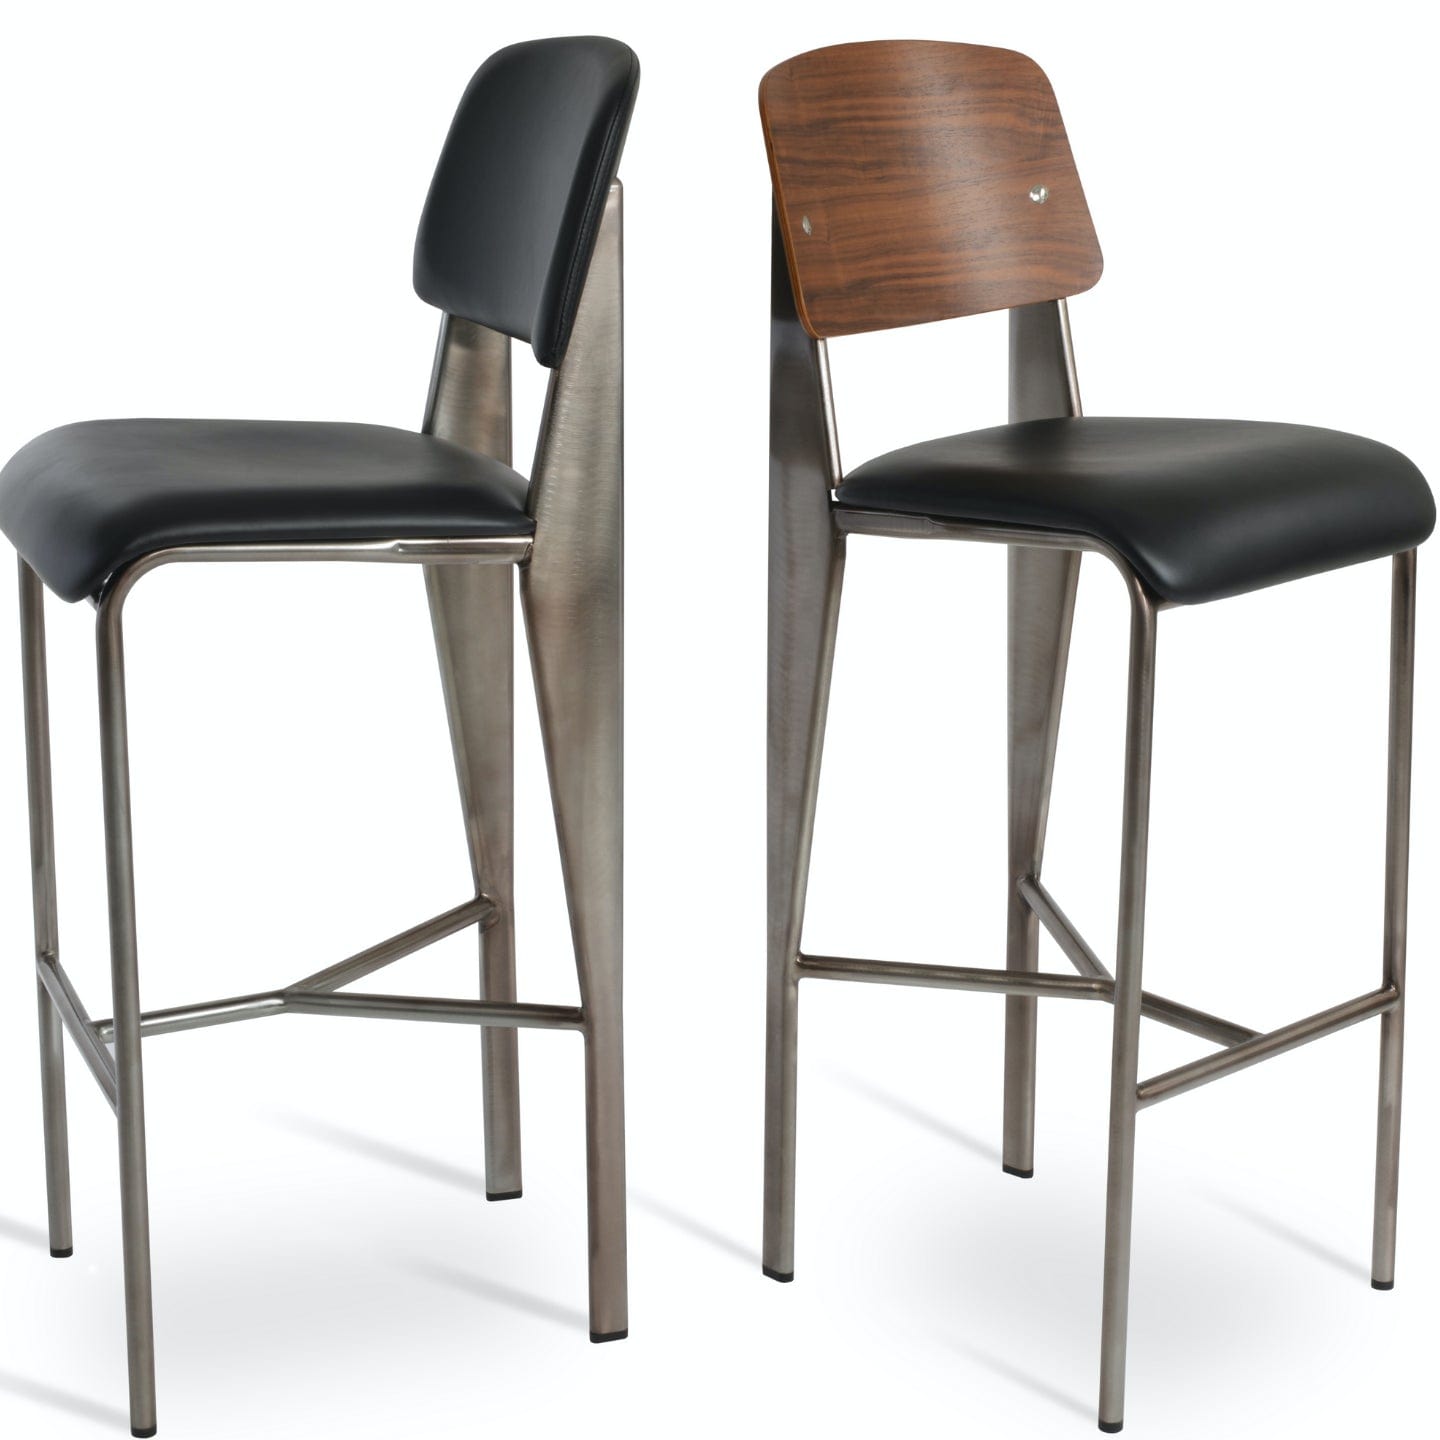 Soho Concept prouve-industrial-metal-base-faux-leather-seat-kitchen-counter-stool-in-walnut